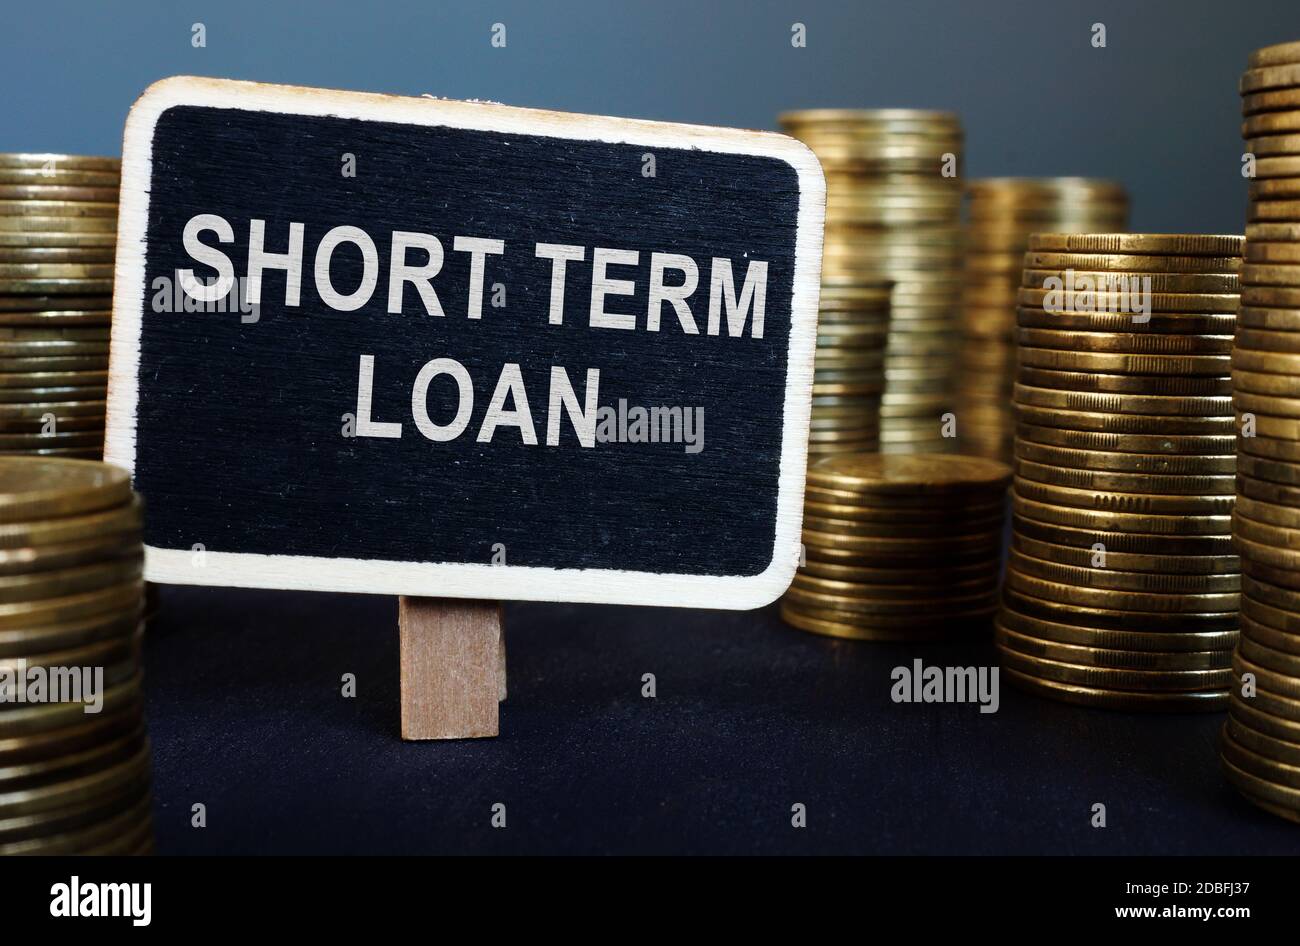 Short term loan inscription and stack of coins Stock Photo - Alamy